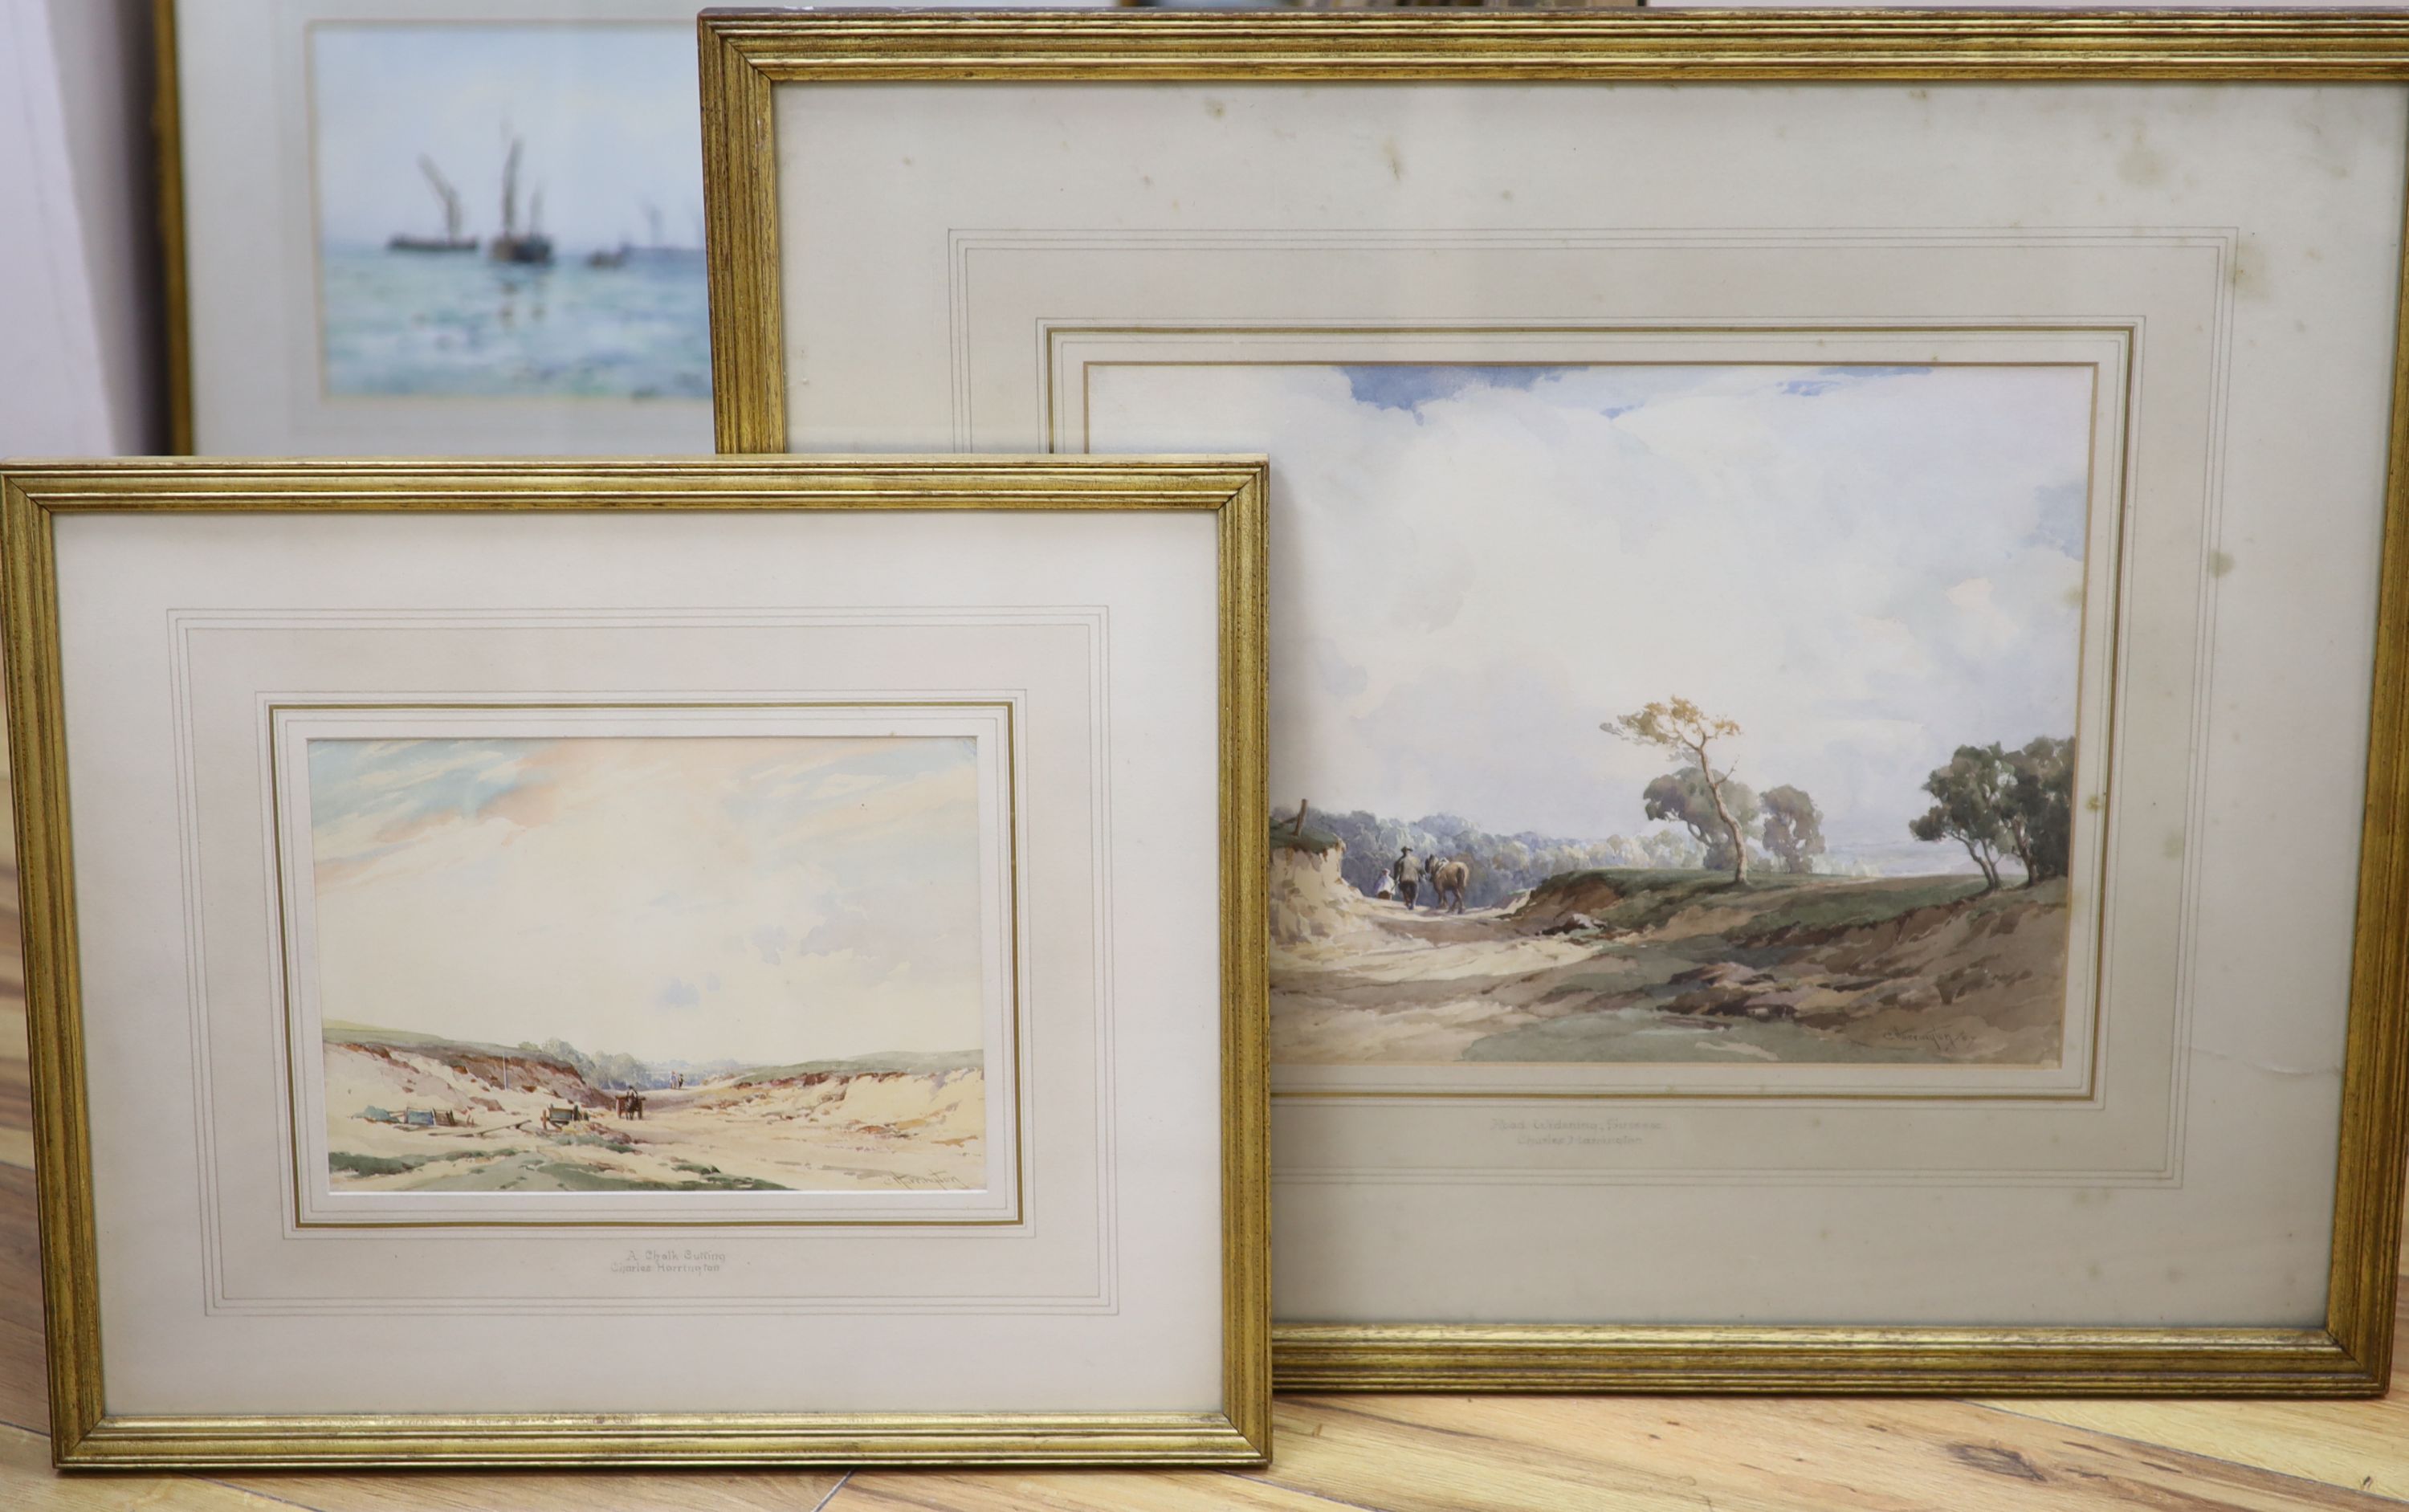 Charles Harrington (1865-1943), two watercolour drawings, 'Road Widening, Sussex' and 'A Chalk Cutting', signed, 27 x 37cm and 17 x 25cm